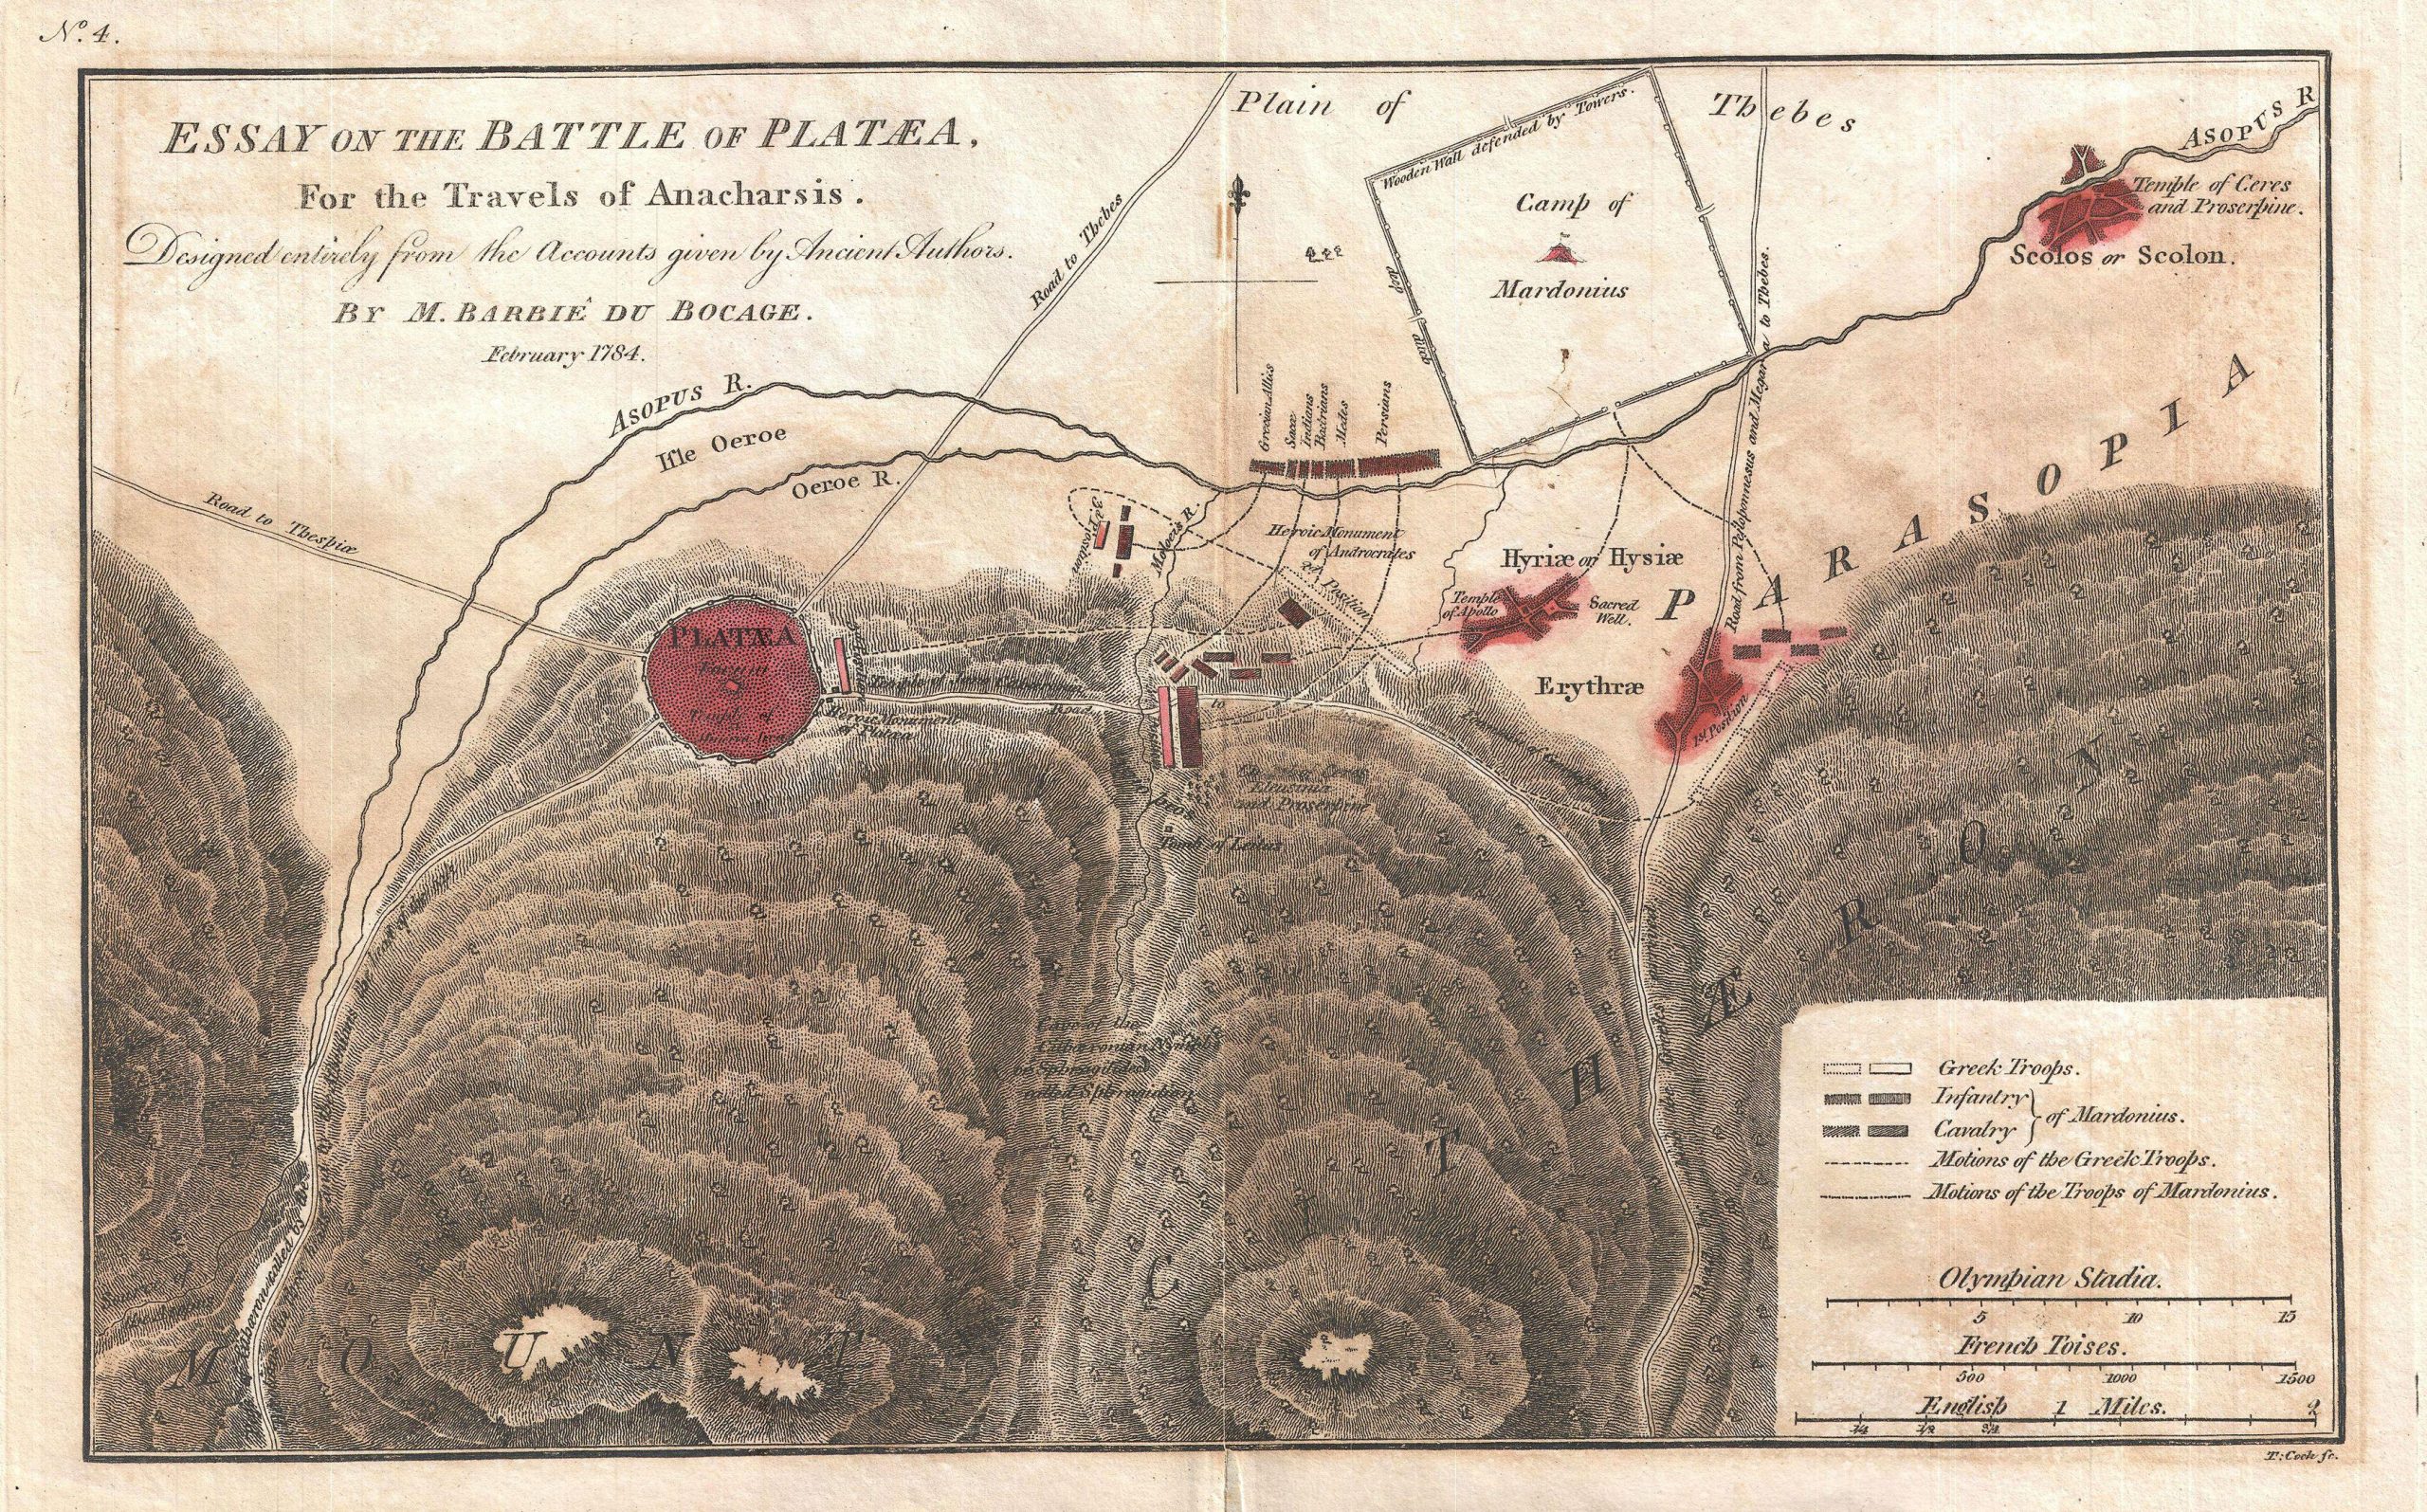 Plataea map from 1784